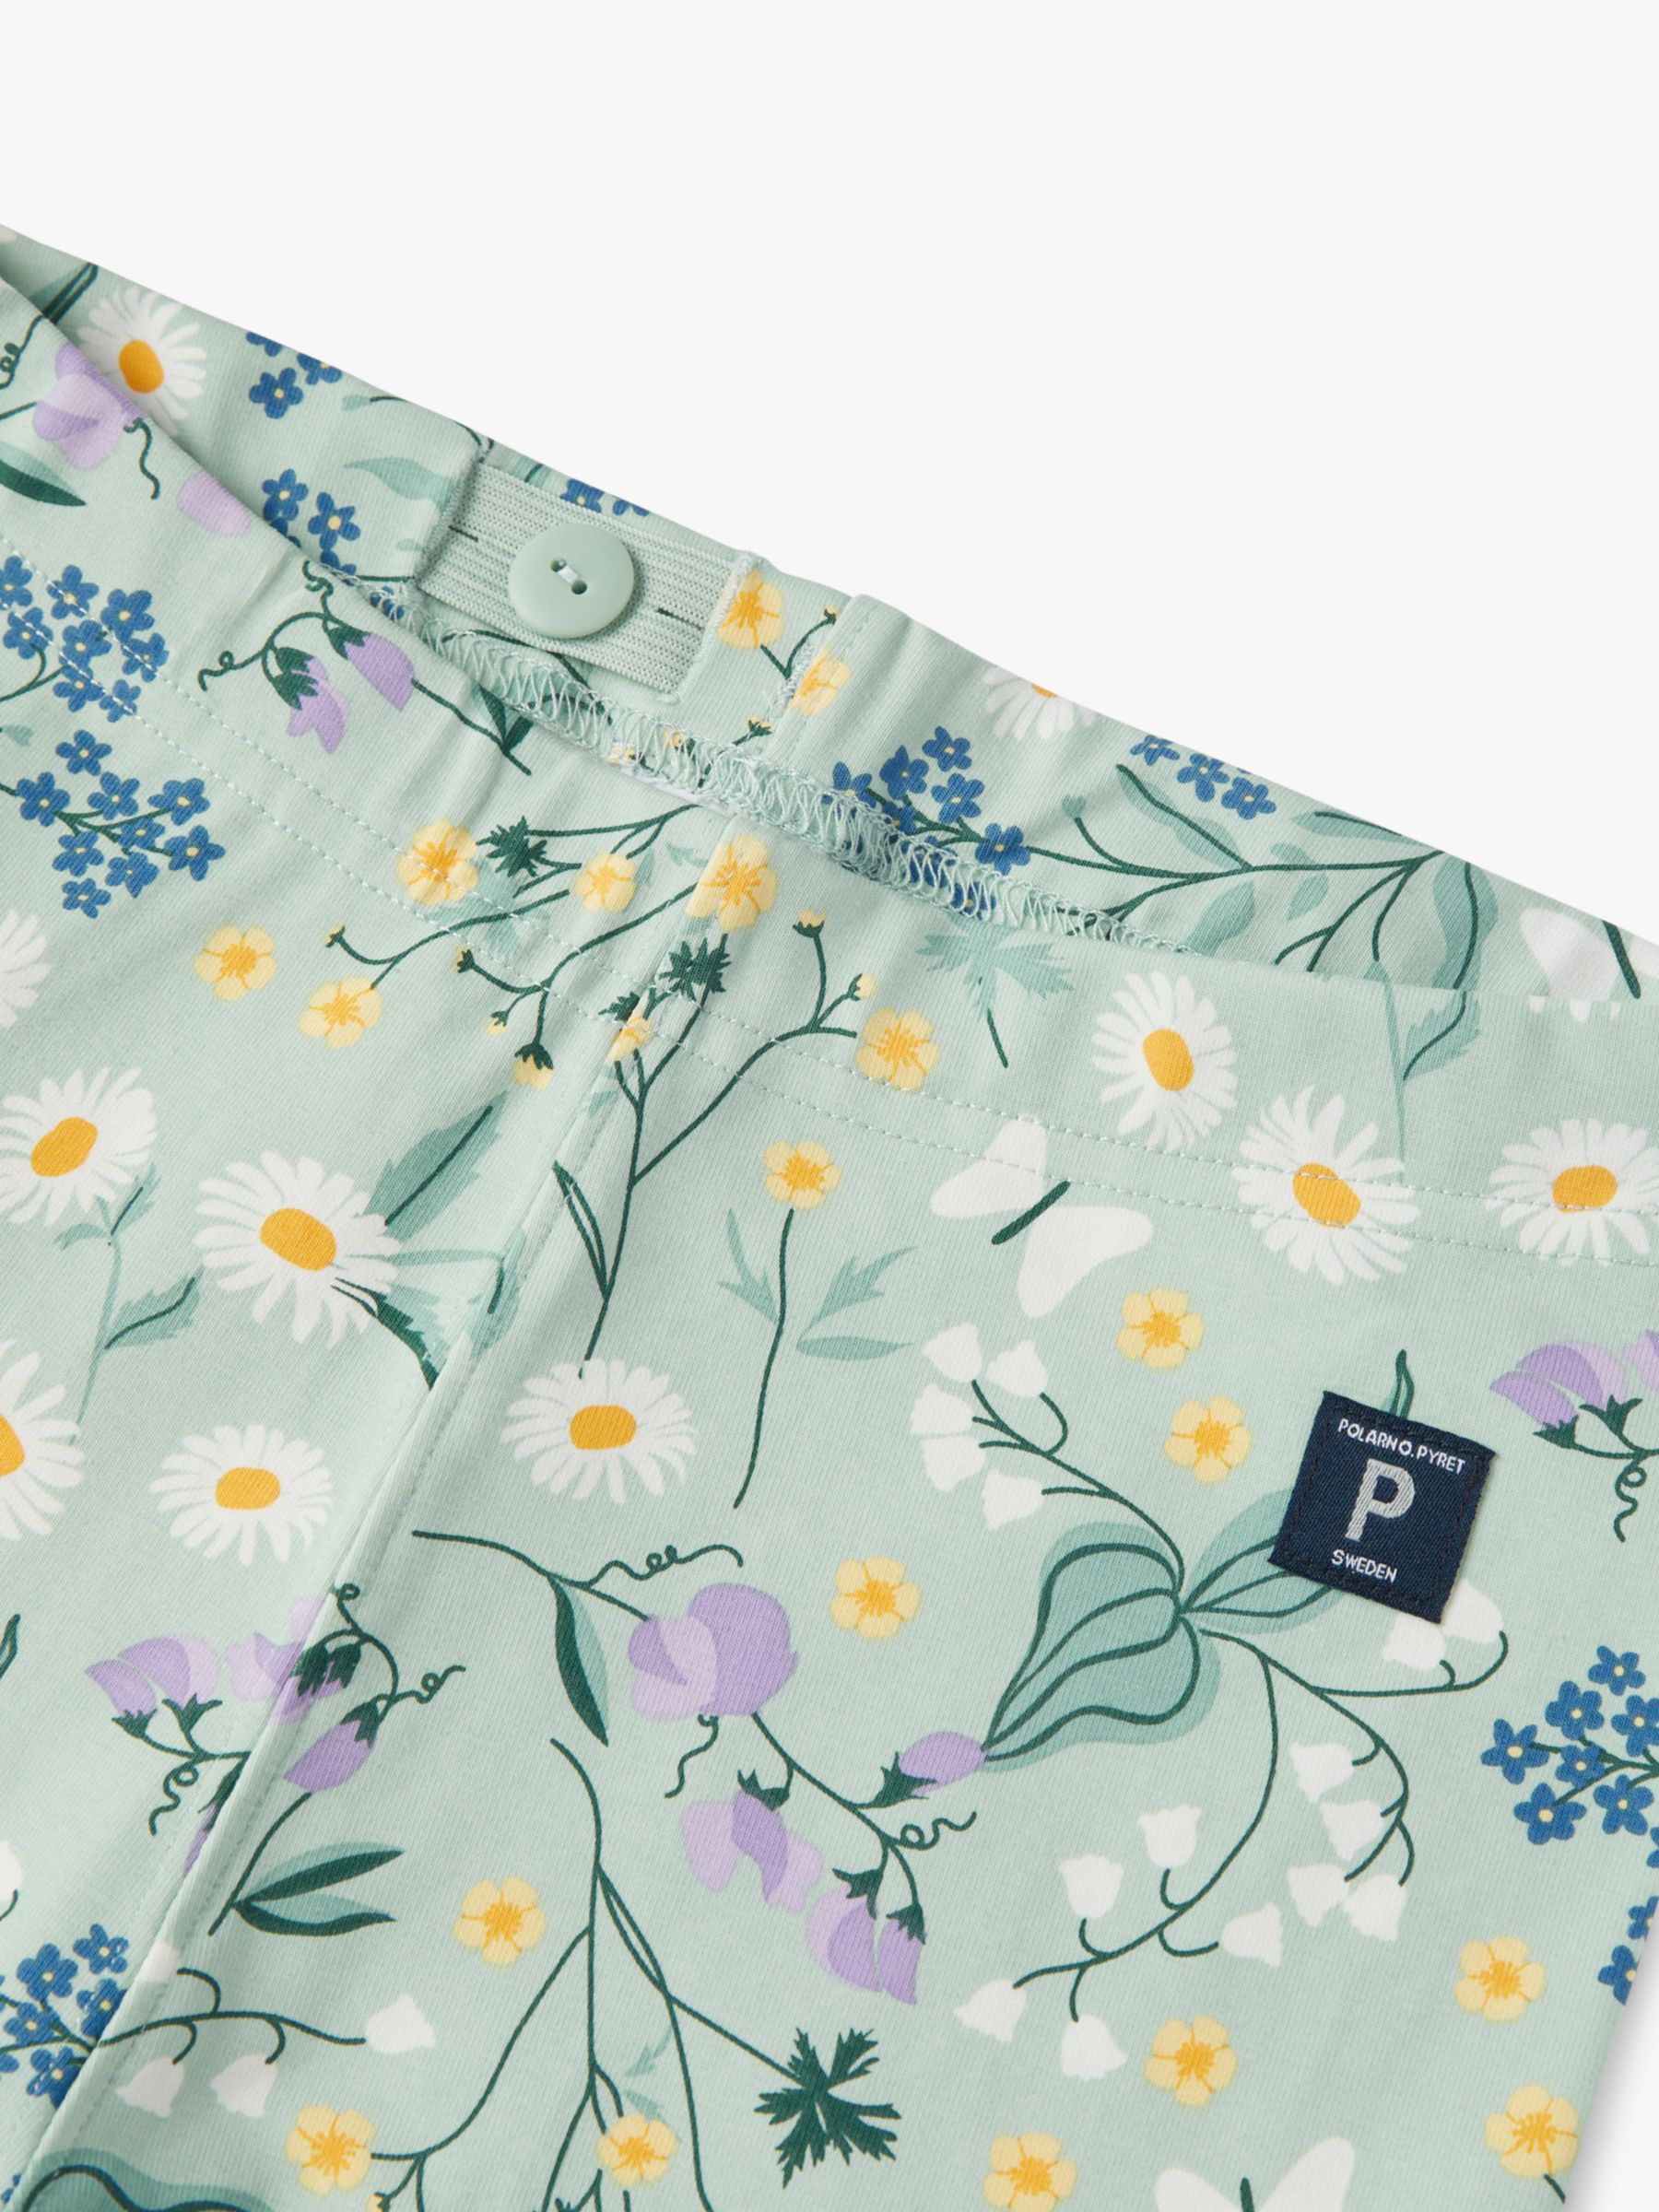 Buy Polarn O. Pyret Kids' Organic Floral Print Cycle Shorts, Duck Egg Blue Online at johnlewis.com